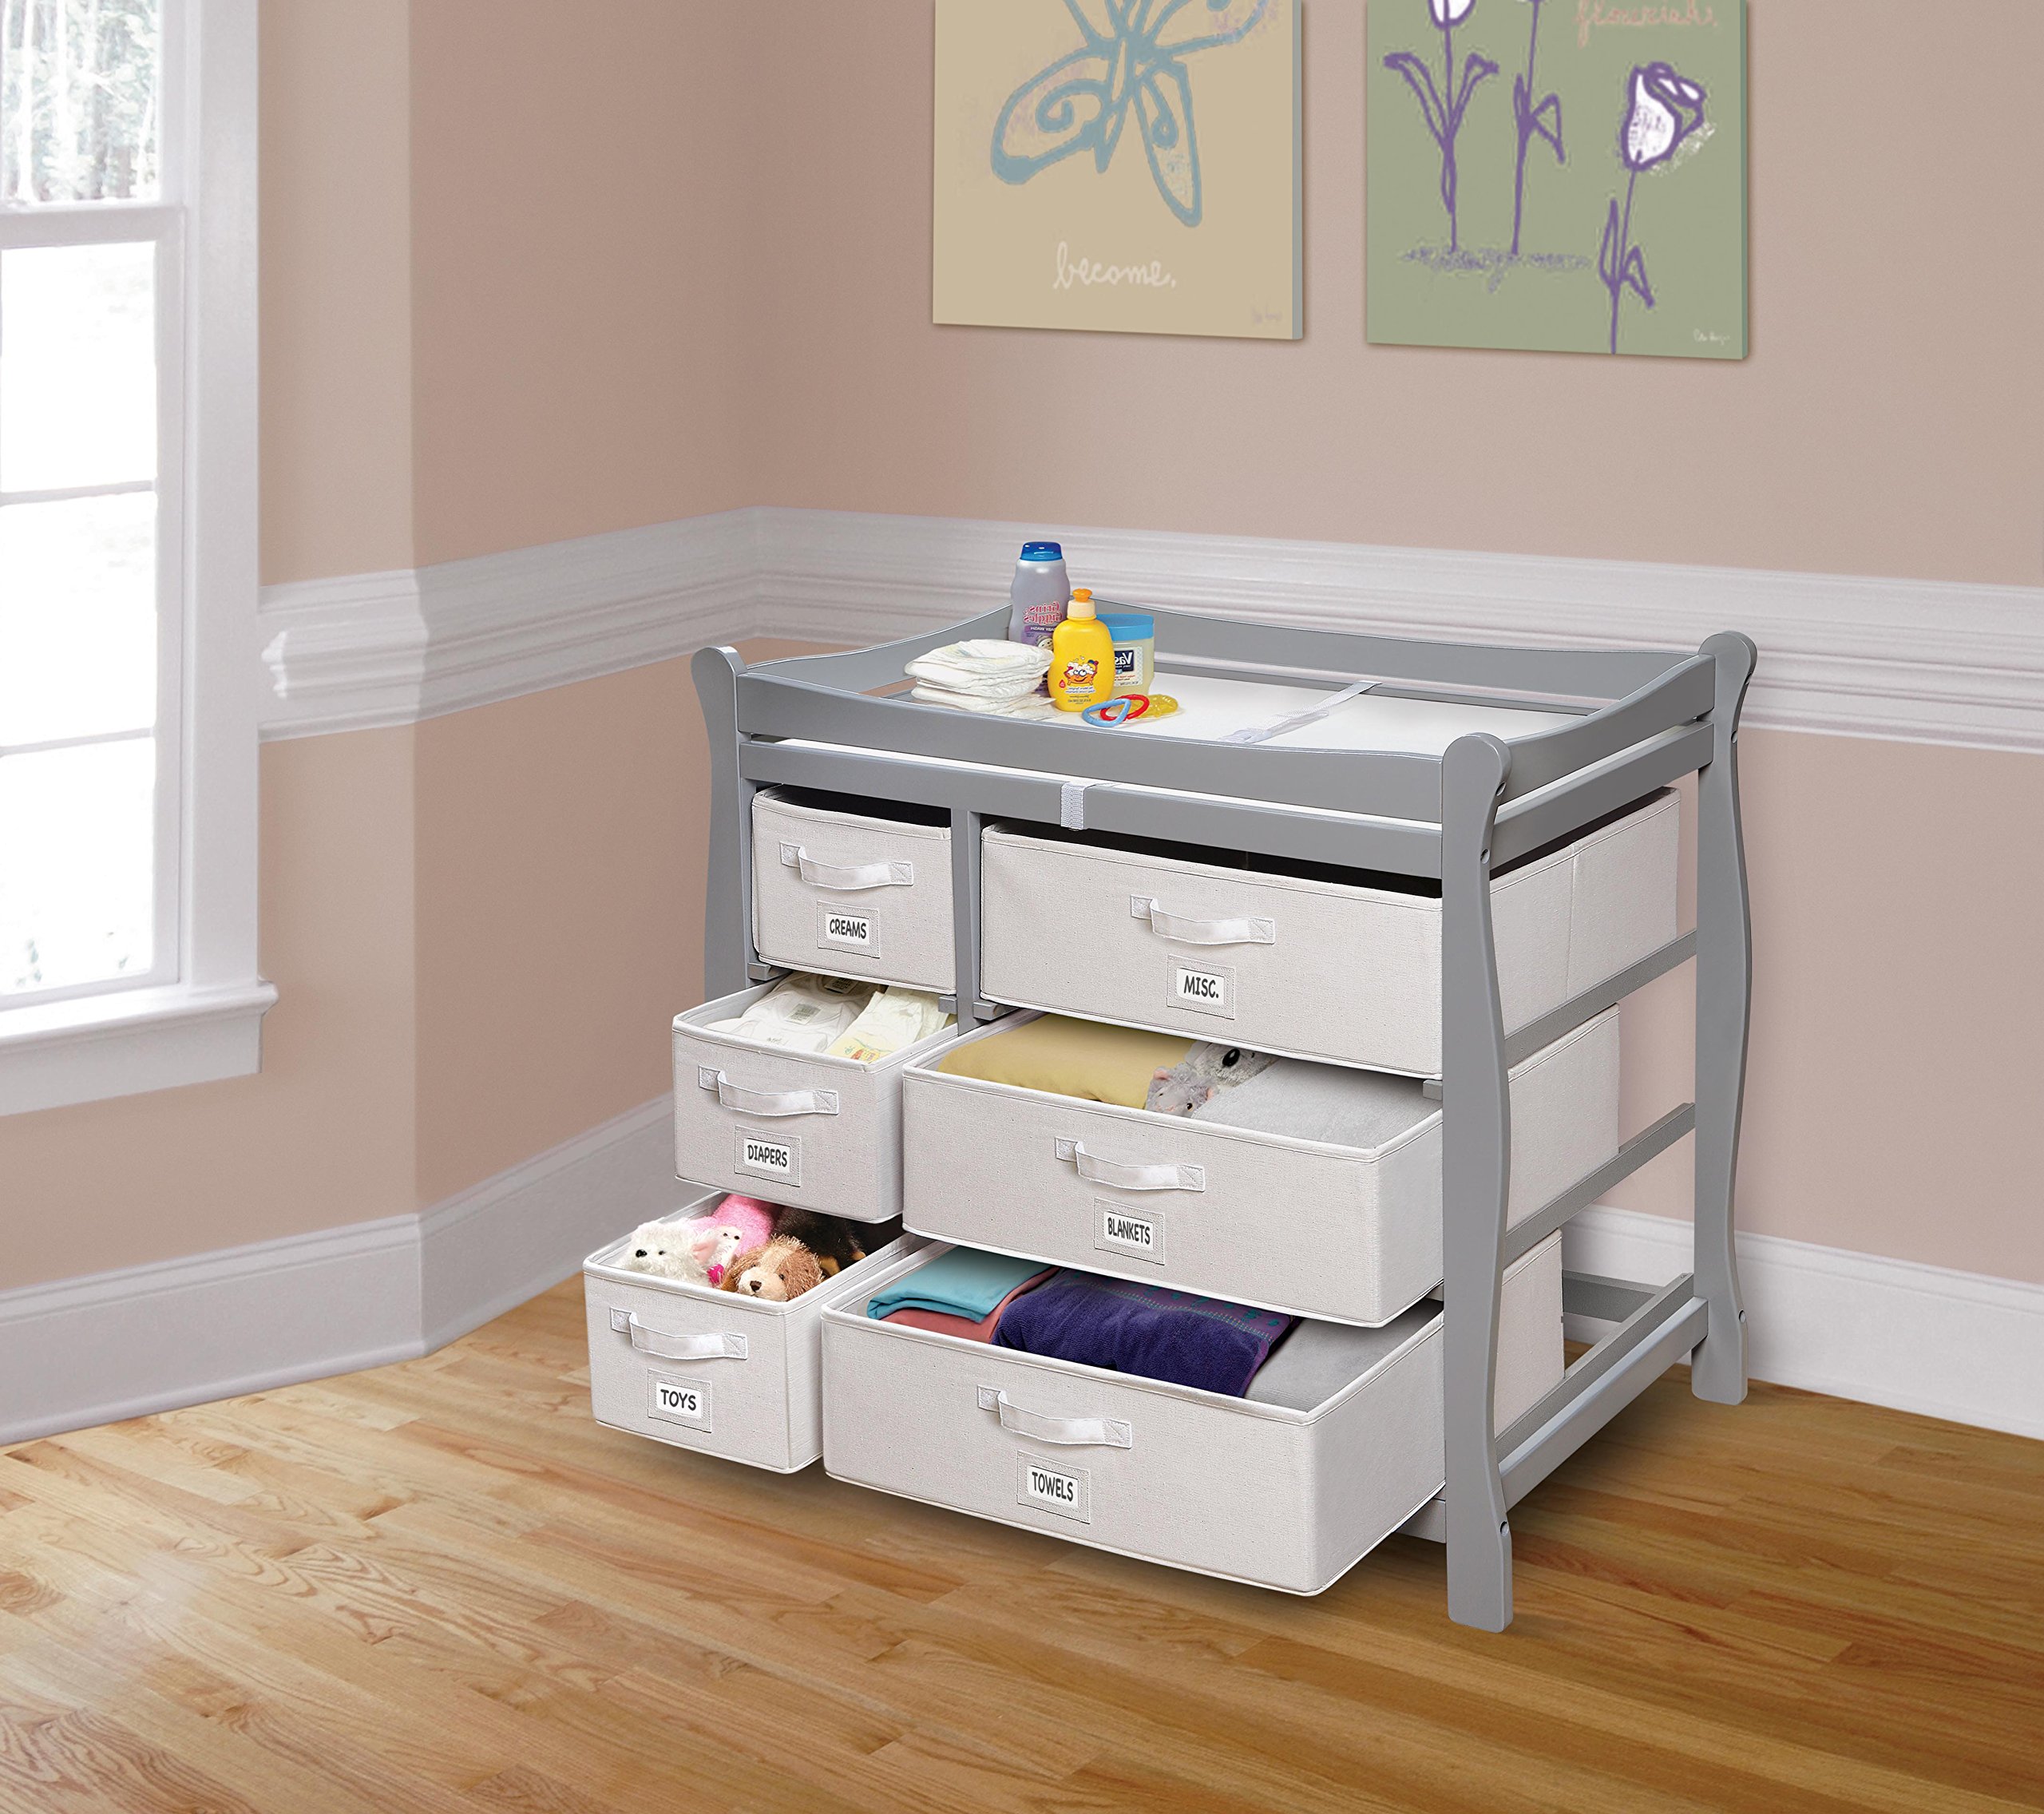 Sleigh Style Baby Changing Table with 6 Storage Baskets and Pad